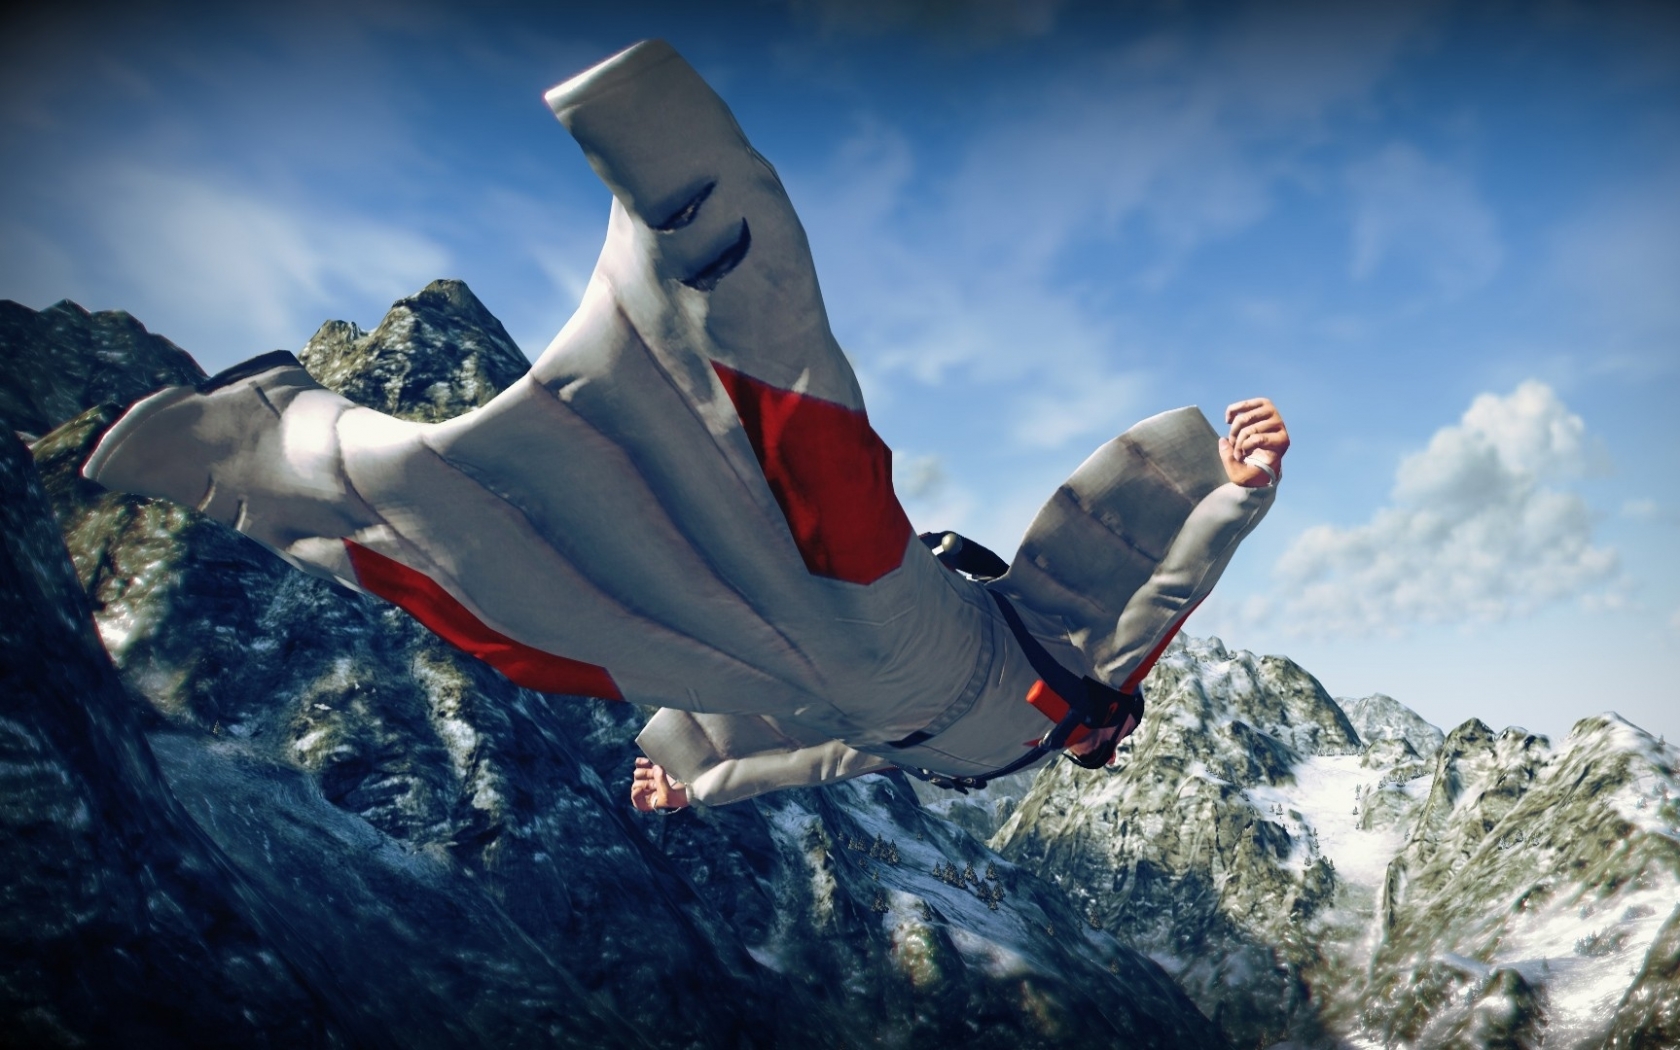 sports skydiving extreme sports parachute wingsuit 1920x1080 wallpaper